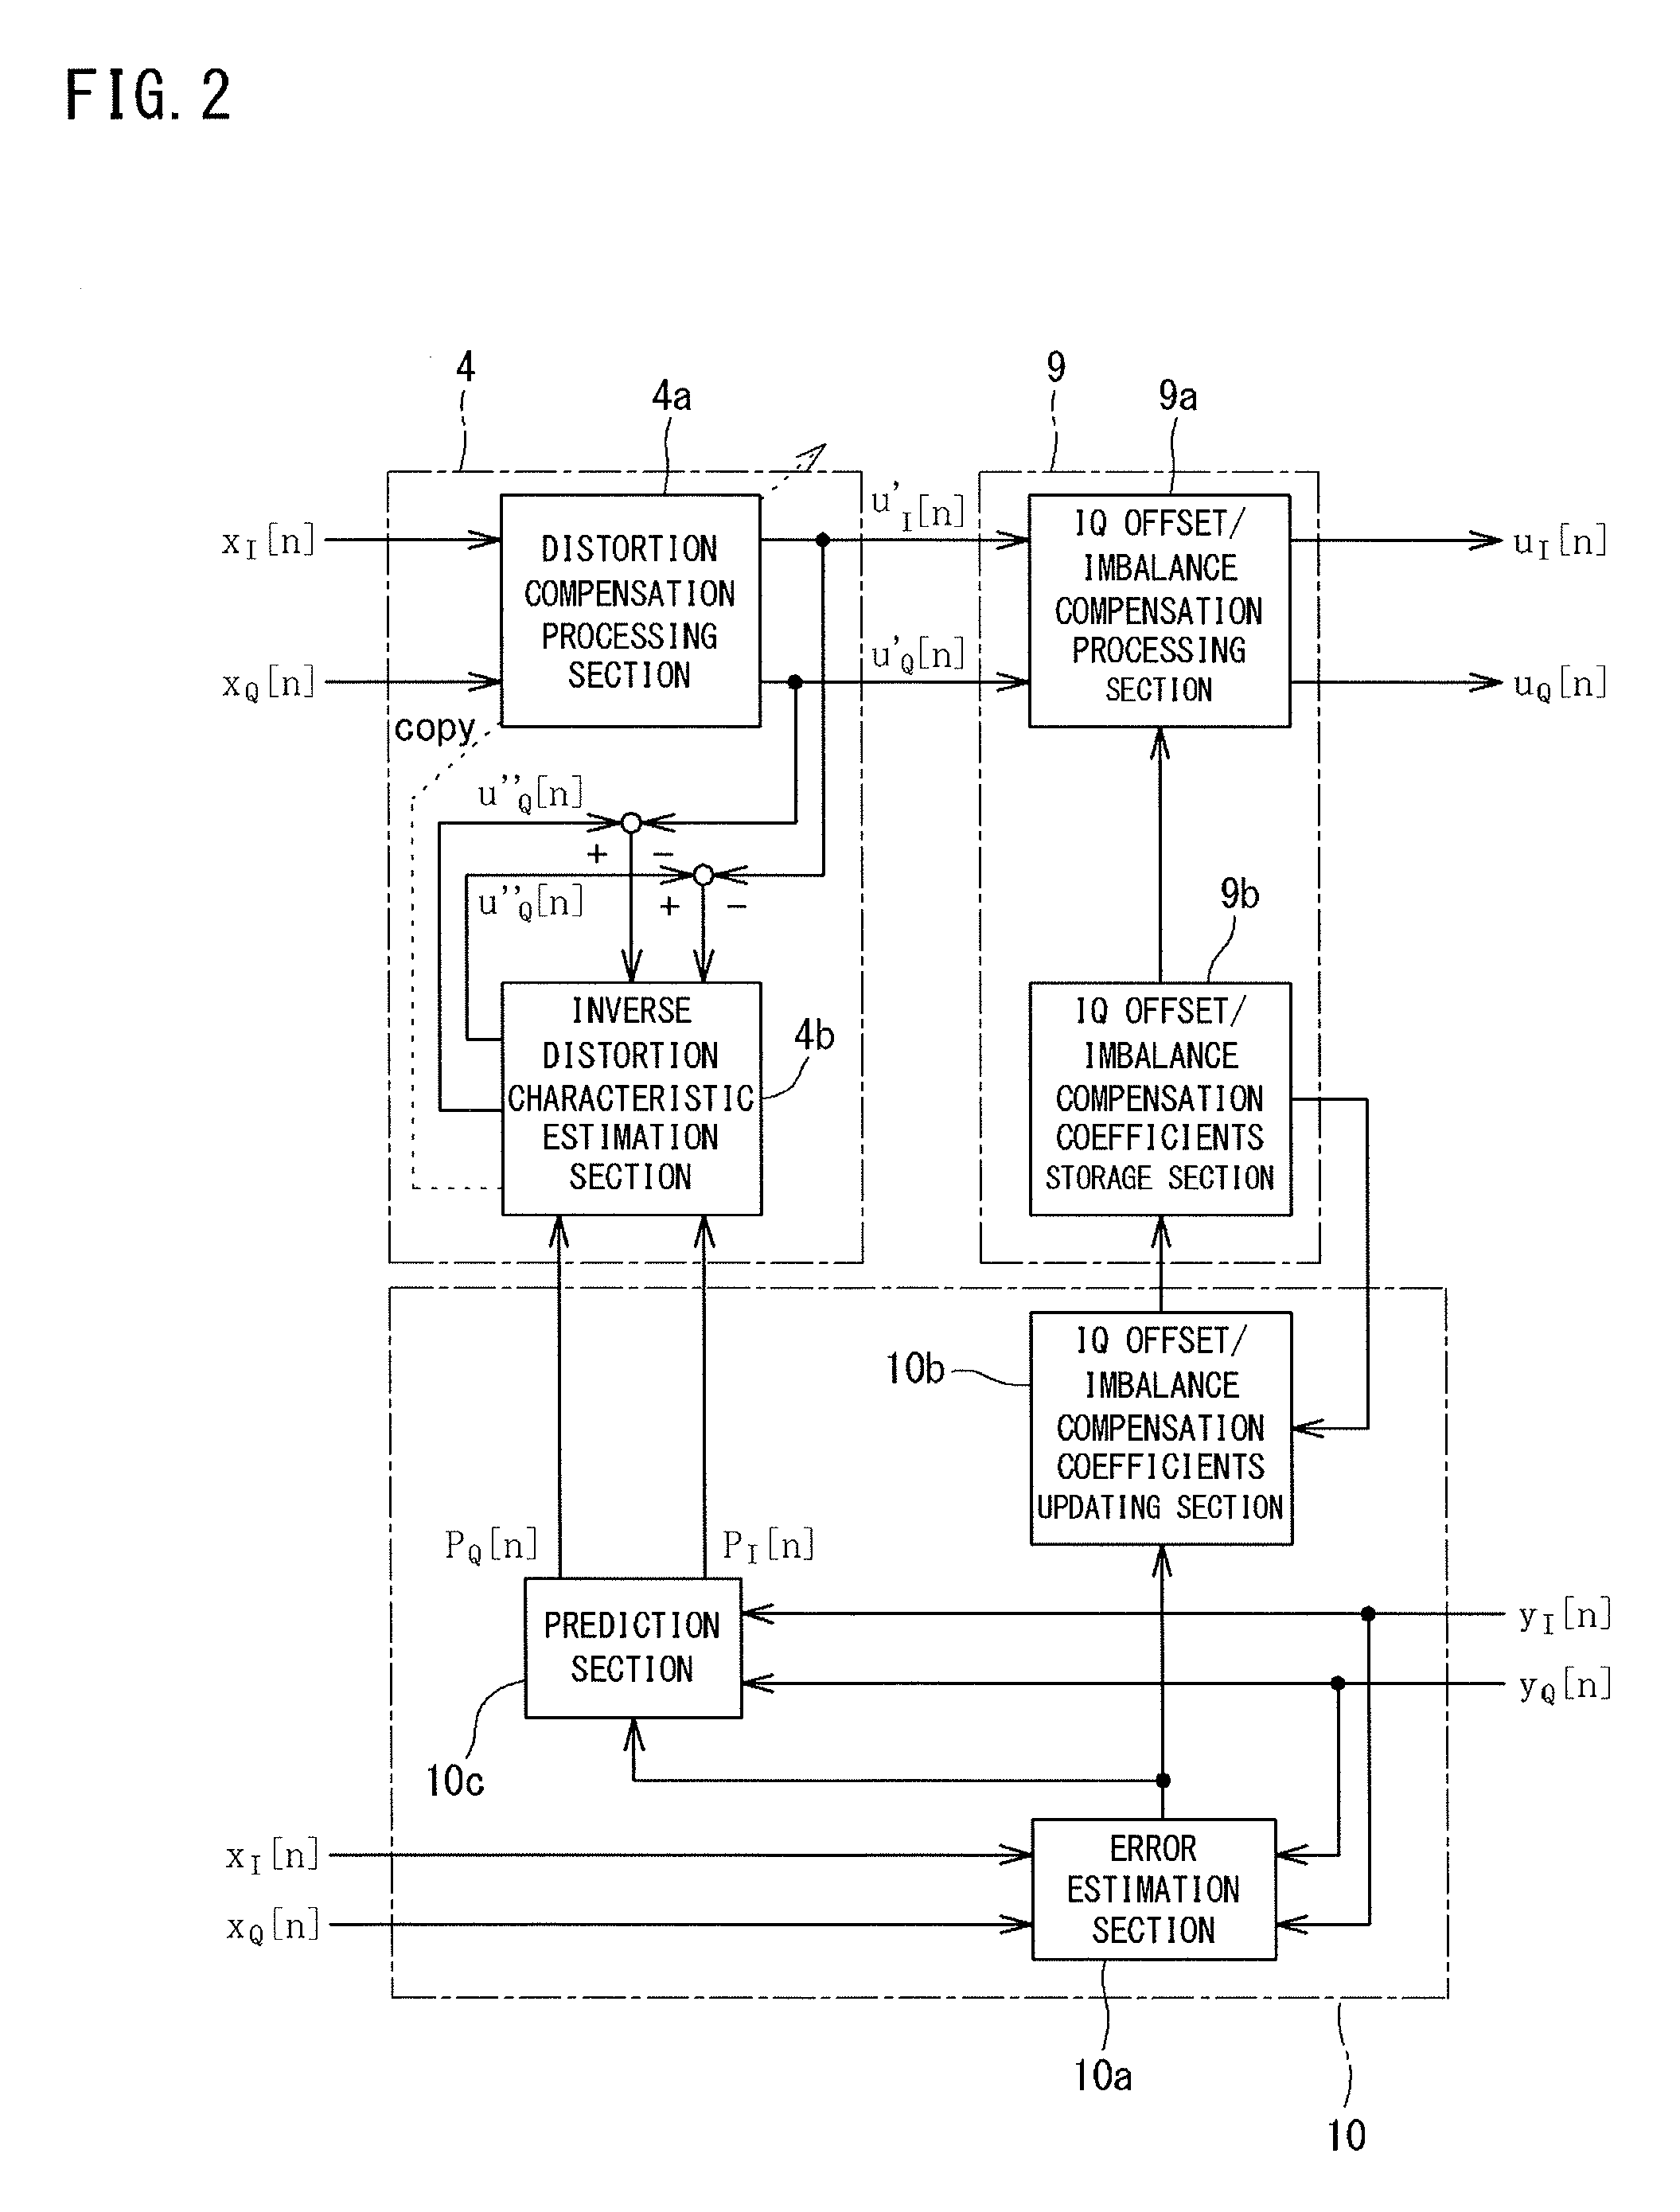 Amplifier circuit and wireless communication equipment